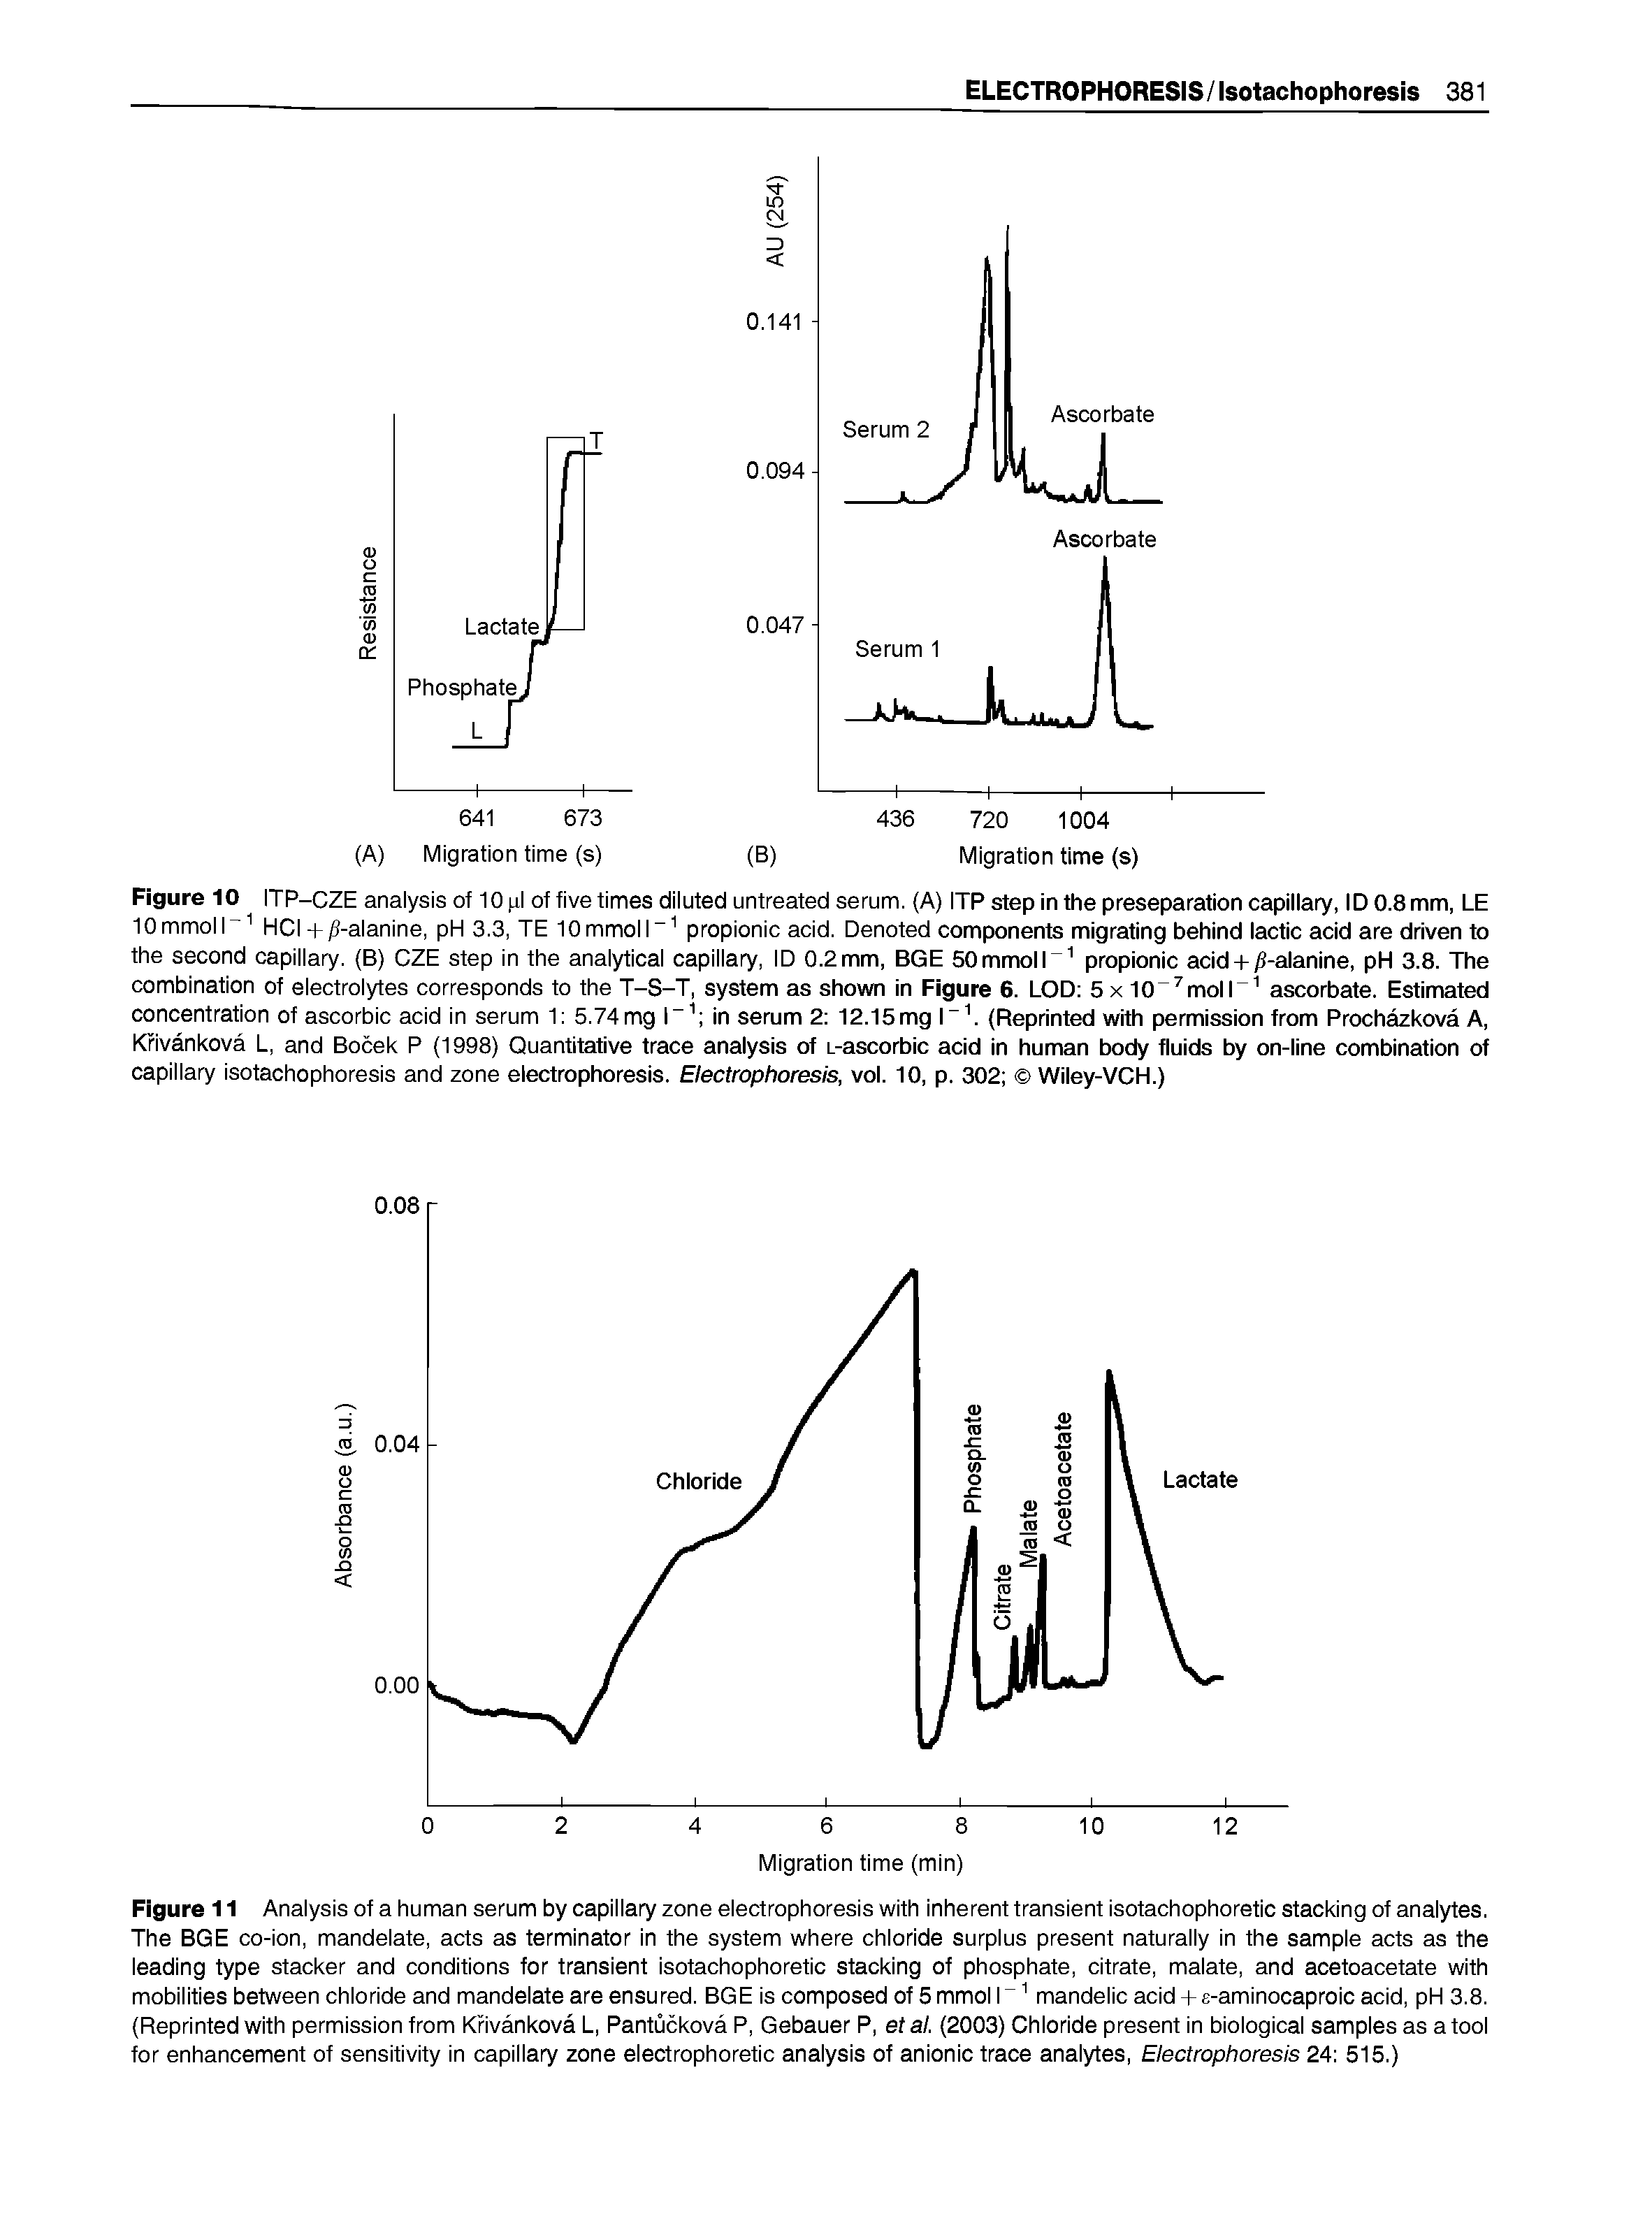 Figure 11 Analysis of a human serum by capillary zone electrophoresis with inherent transient isotachophoretic stacking of analytes. The BGE co-ion, mandelate, acts as terminator in the system where chloride surplus present naturally in the sample acts as the leading type stacker and conditions for transient isotachophoretic stacking of phosphate, citrate, malate, and acetoacetate with mobilities between chloride and mandelate are ensured. BGE is composed of 5 mmol r mandelic acid-h e-aminocaproic acid, pH 3.8. Reprinted with permission from Kfivankova L, Pantuckova P, Gebauer P, et al. (2003) Chloride present in biological samples as a tool for enhancement of sensitivity in capillary zone electrophoretic analysis of anionic trace analytes. Electrophoresis 24 515.)...